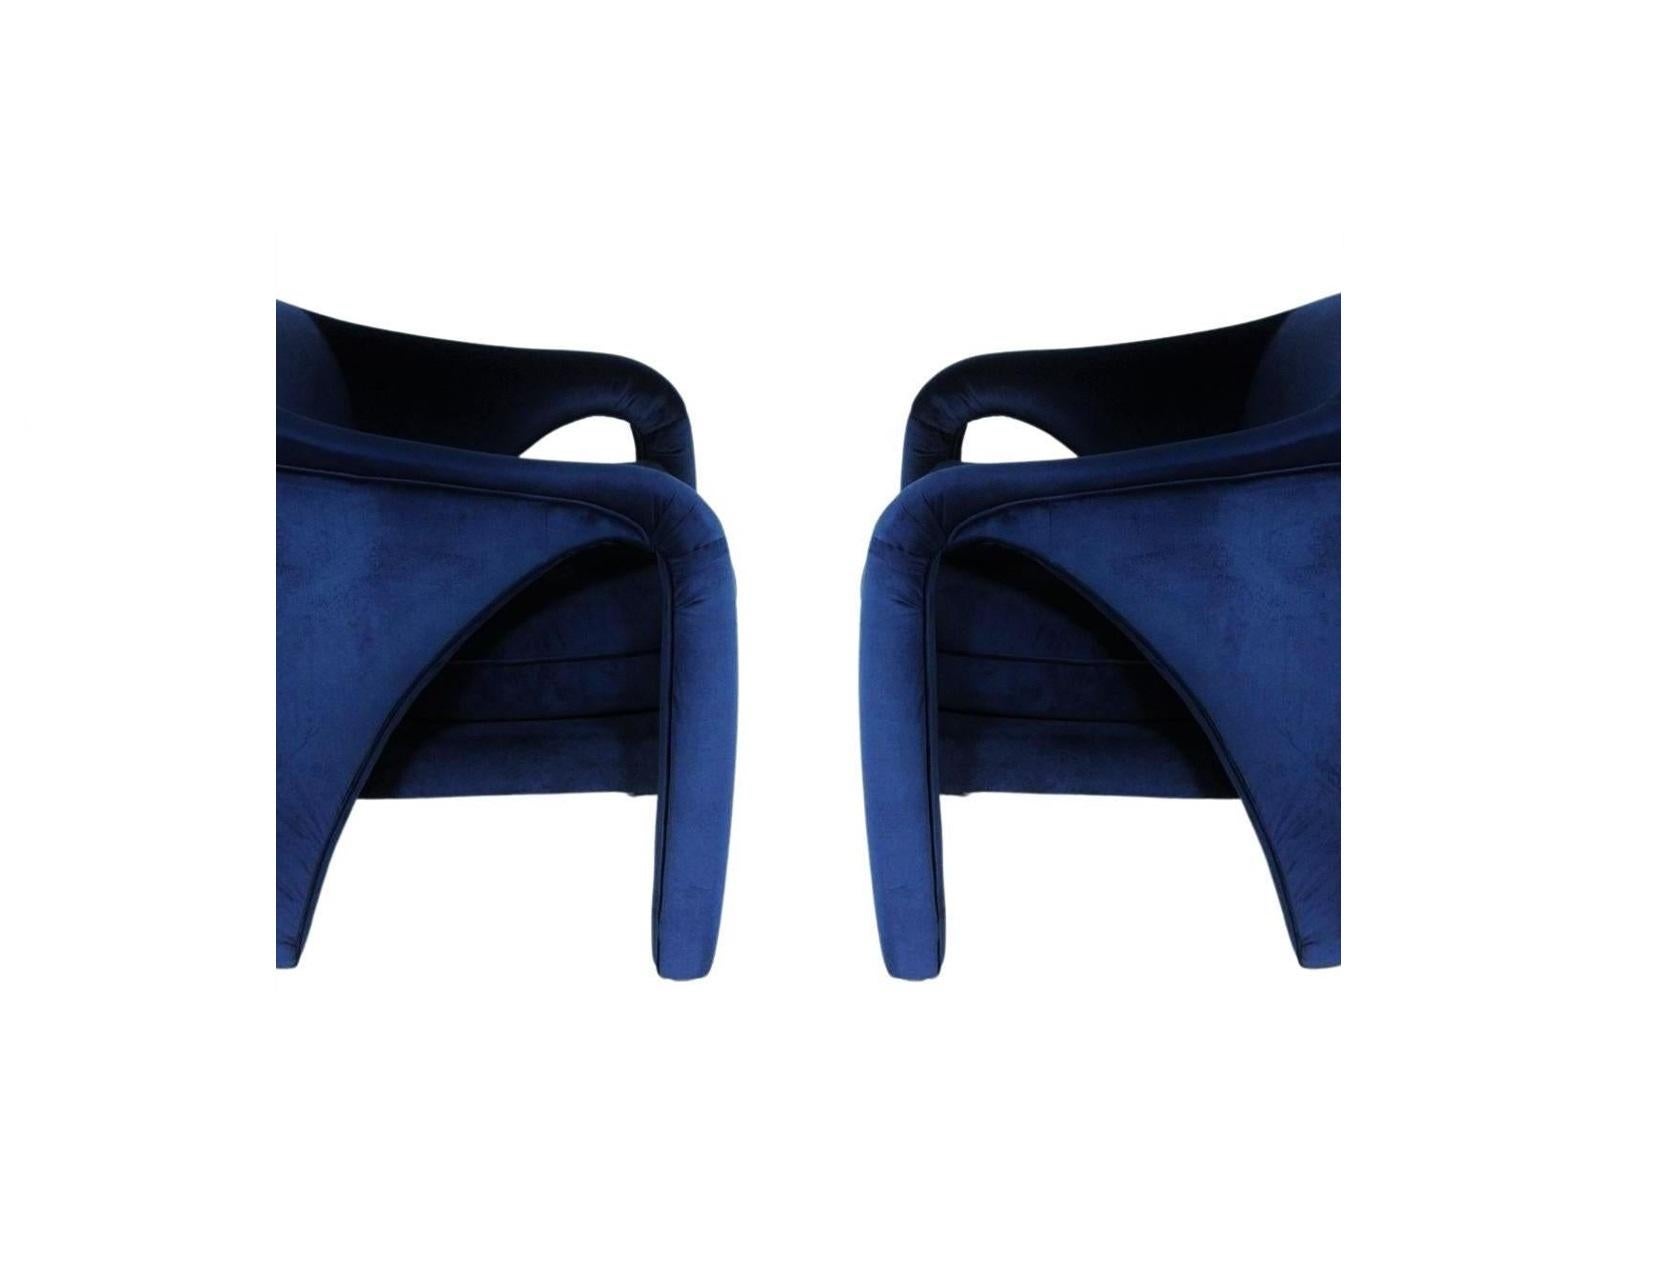 Vladimir Kaganesque Navy Blue Lounge Chairs by Weiman For Sale 1